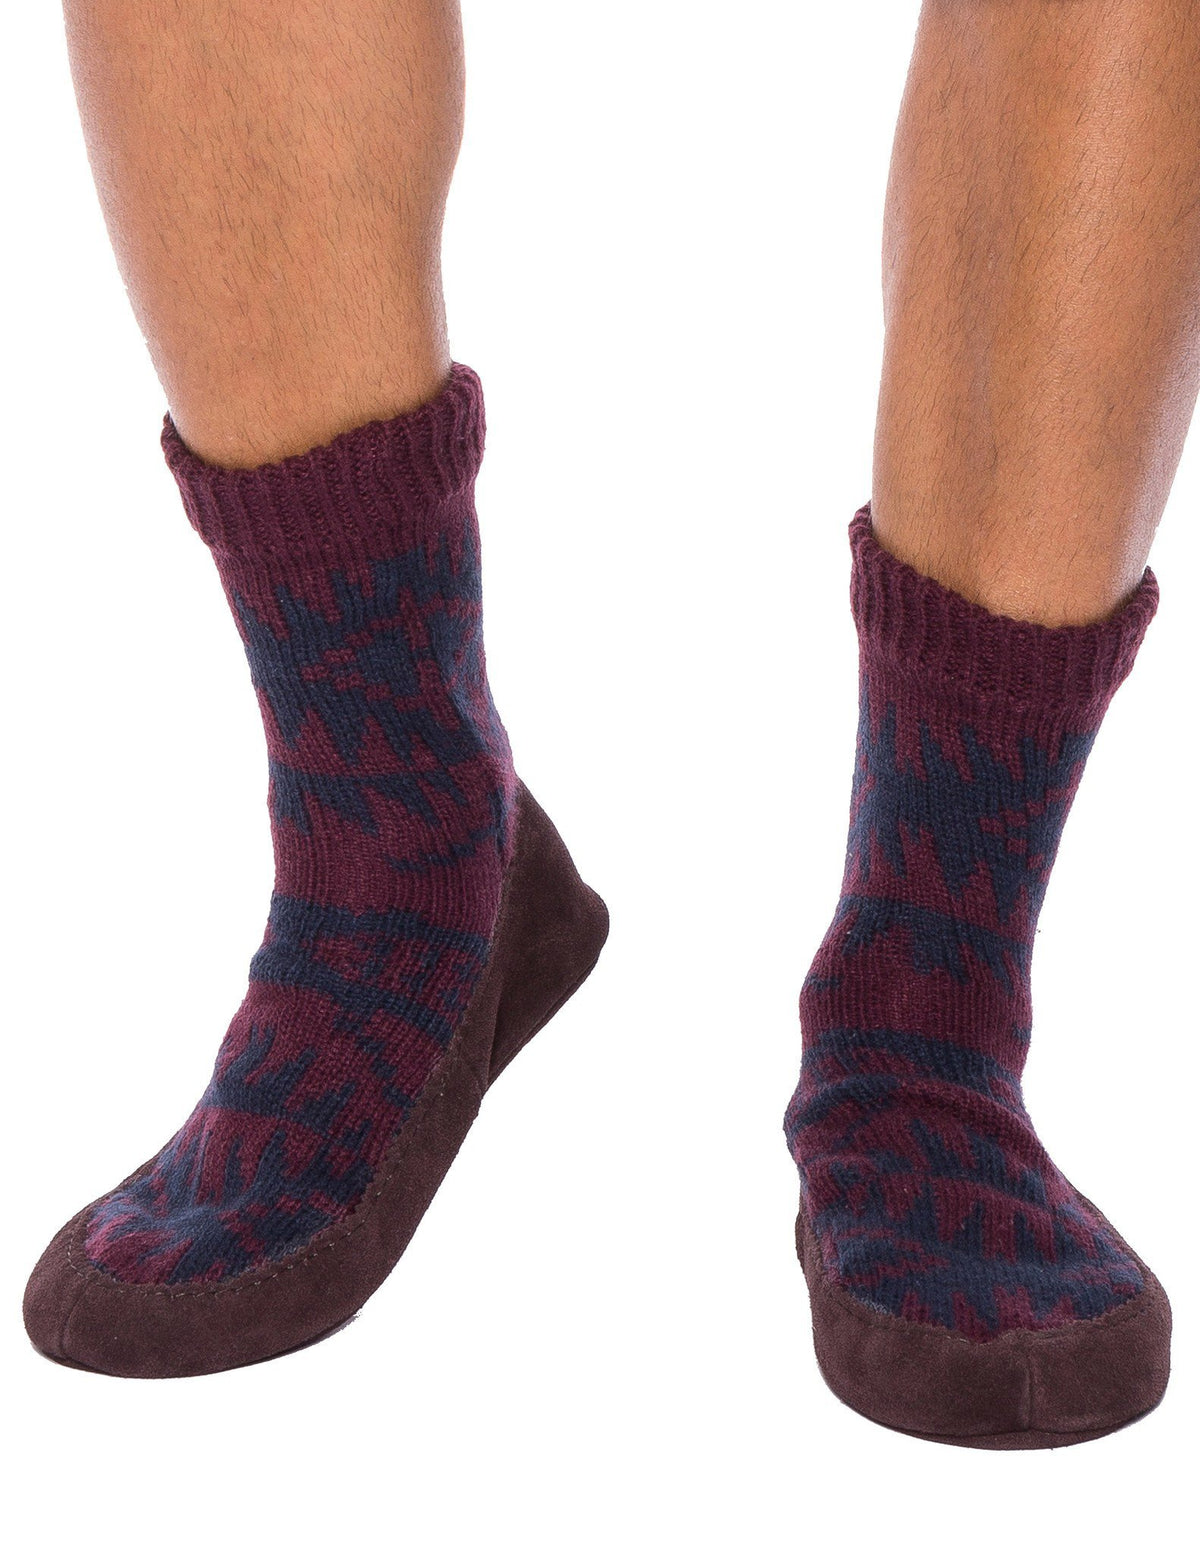 Men's Knit Moccassin Style Slipper Socks with Suede Sole - Fig/Navy